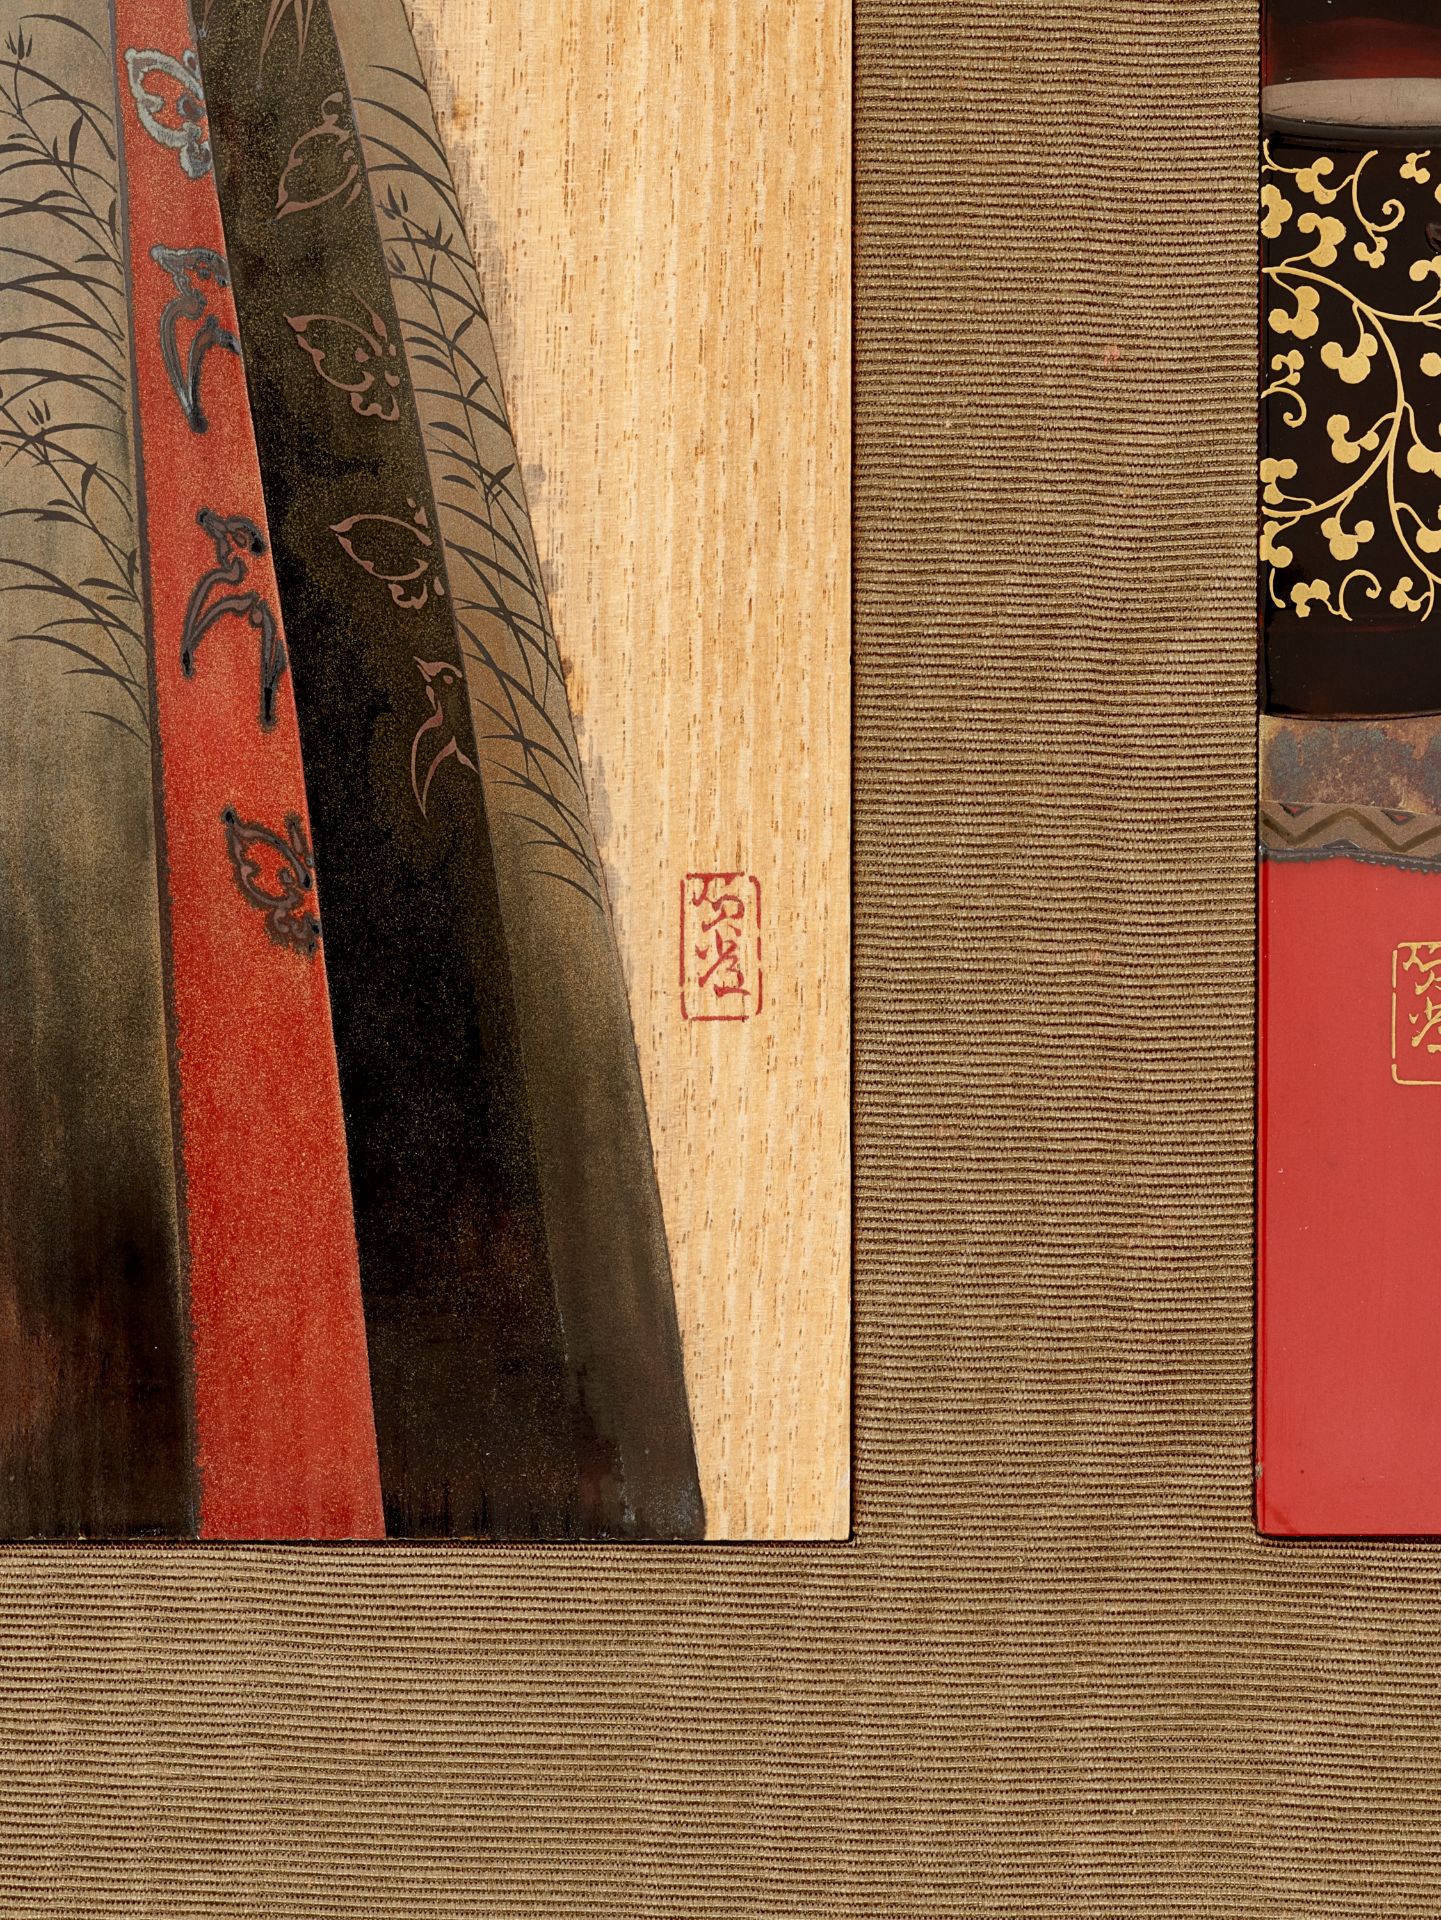 SADAATSU: A FINE ZESHIN-SCHOOL SET OF FIVE LACQUER TANZAKU (POEM CARDS) WITH FIVE FESTIVALS OF JAPAN - Image 13 of 15